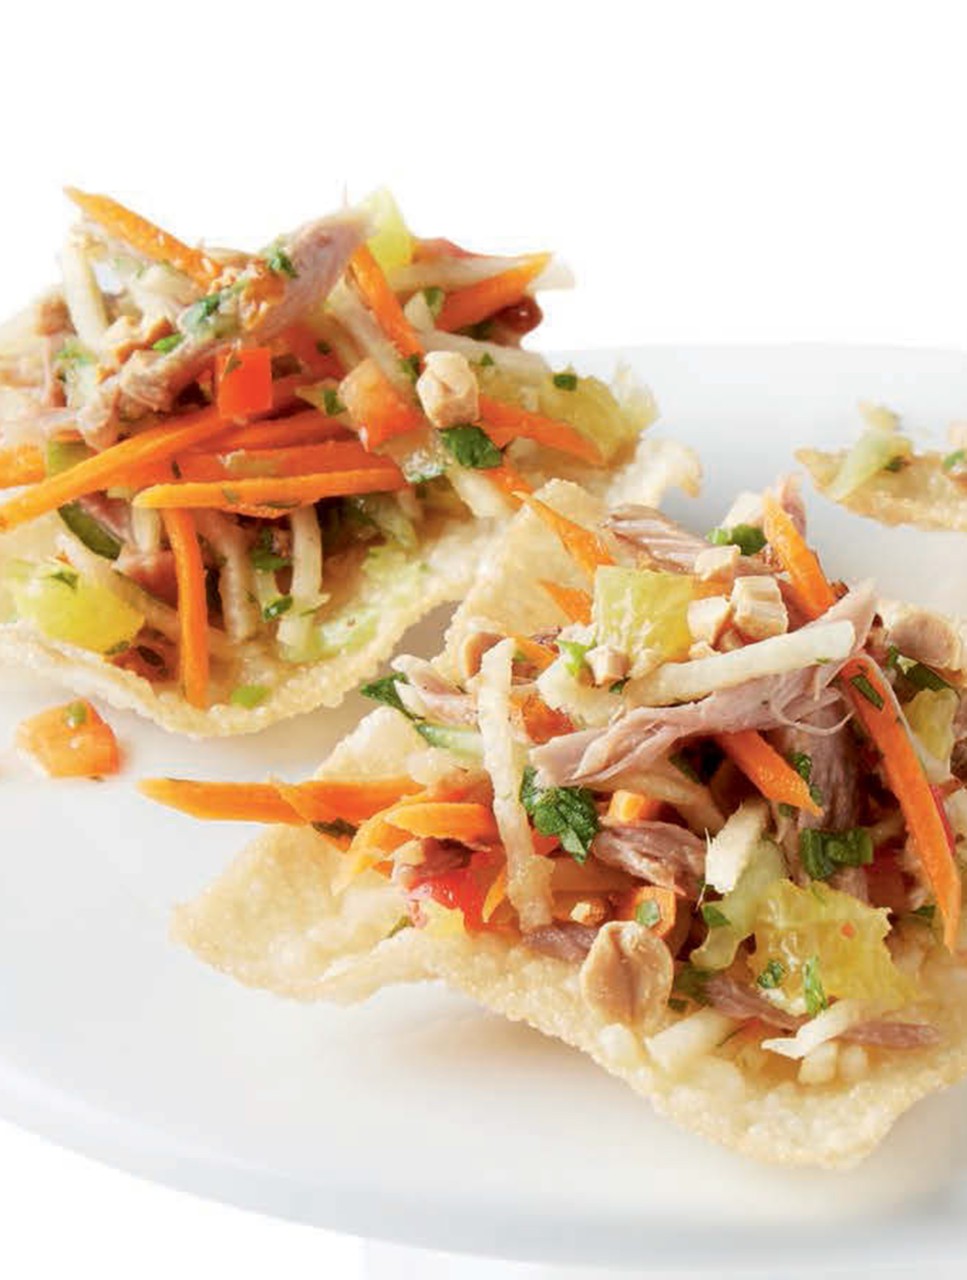 Grand Marnier-Marinated Pulled Duck with Asian-Style Slaw on Crispy Won Tons